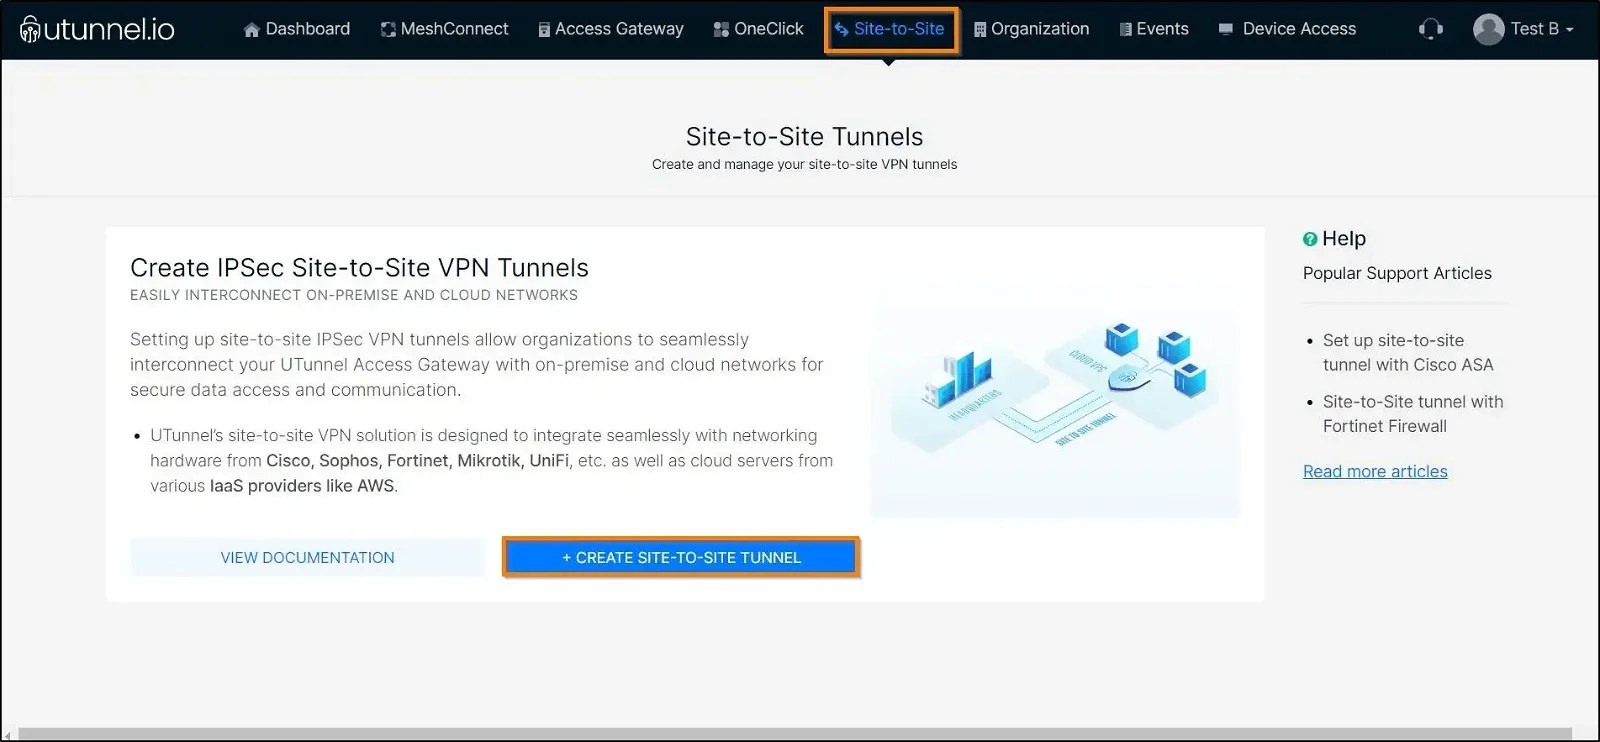 Set up site-to-site tunnel with Cisco ASA navigate to site-to-site tab